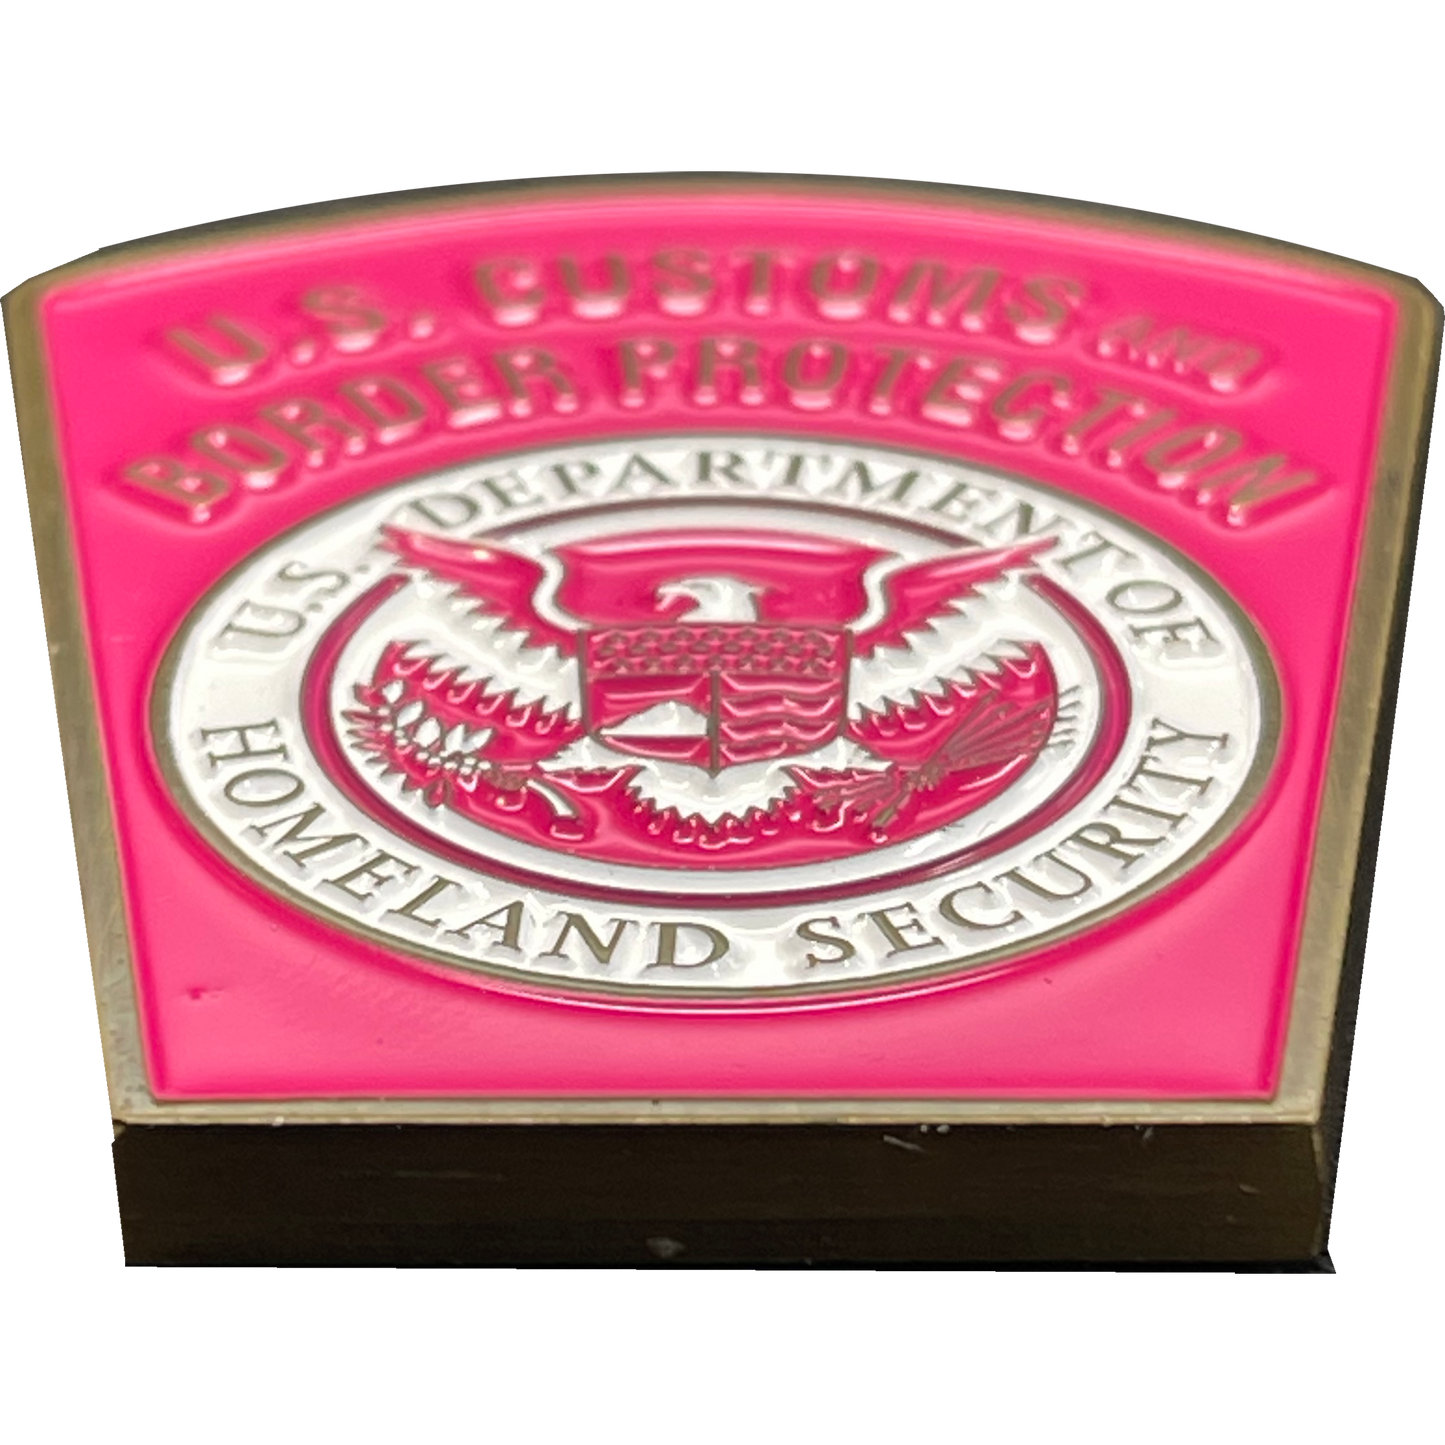 BL15-009 CBP Pink Border Patrol Field Operations Air and Marine Challenge Coin Breast Cancer Cancer Awareness